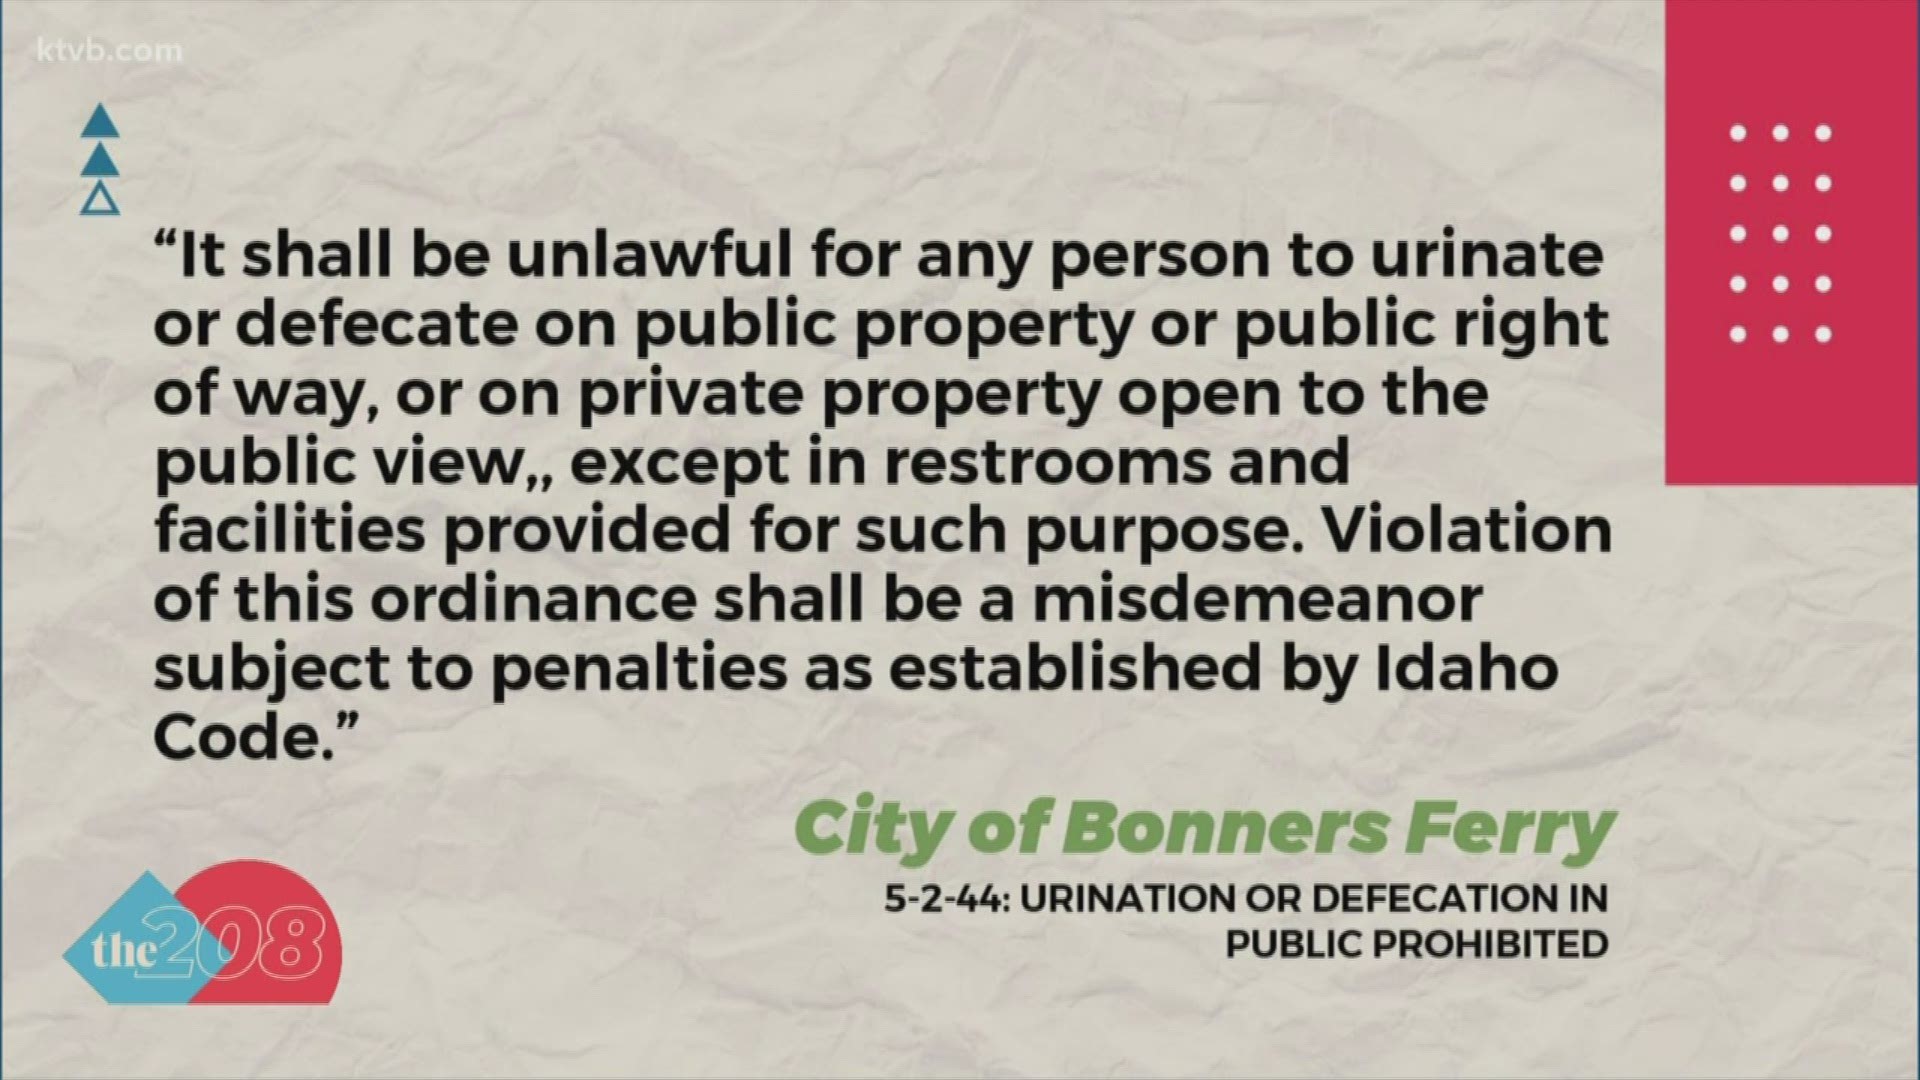 Bonners Ferry residents can now be charged with a misdemeanor for relieving themselves on public property.